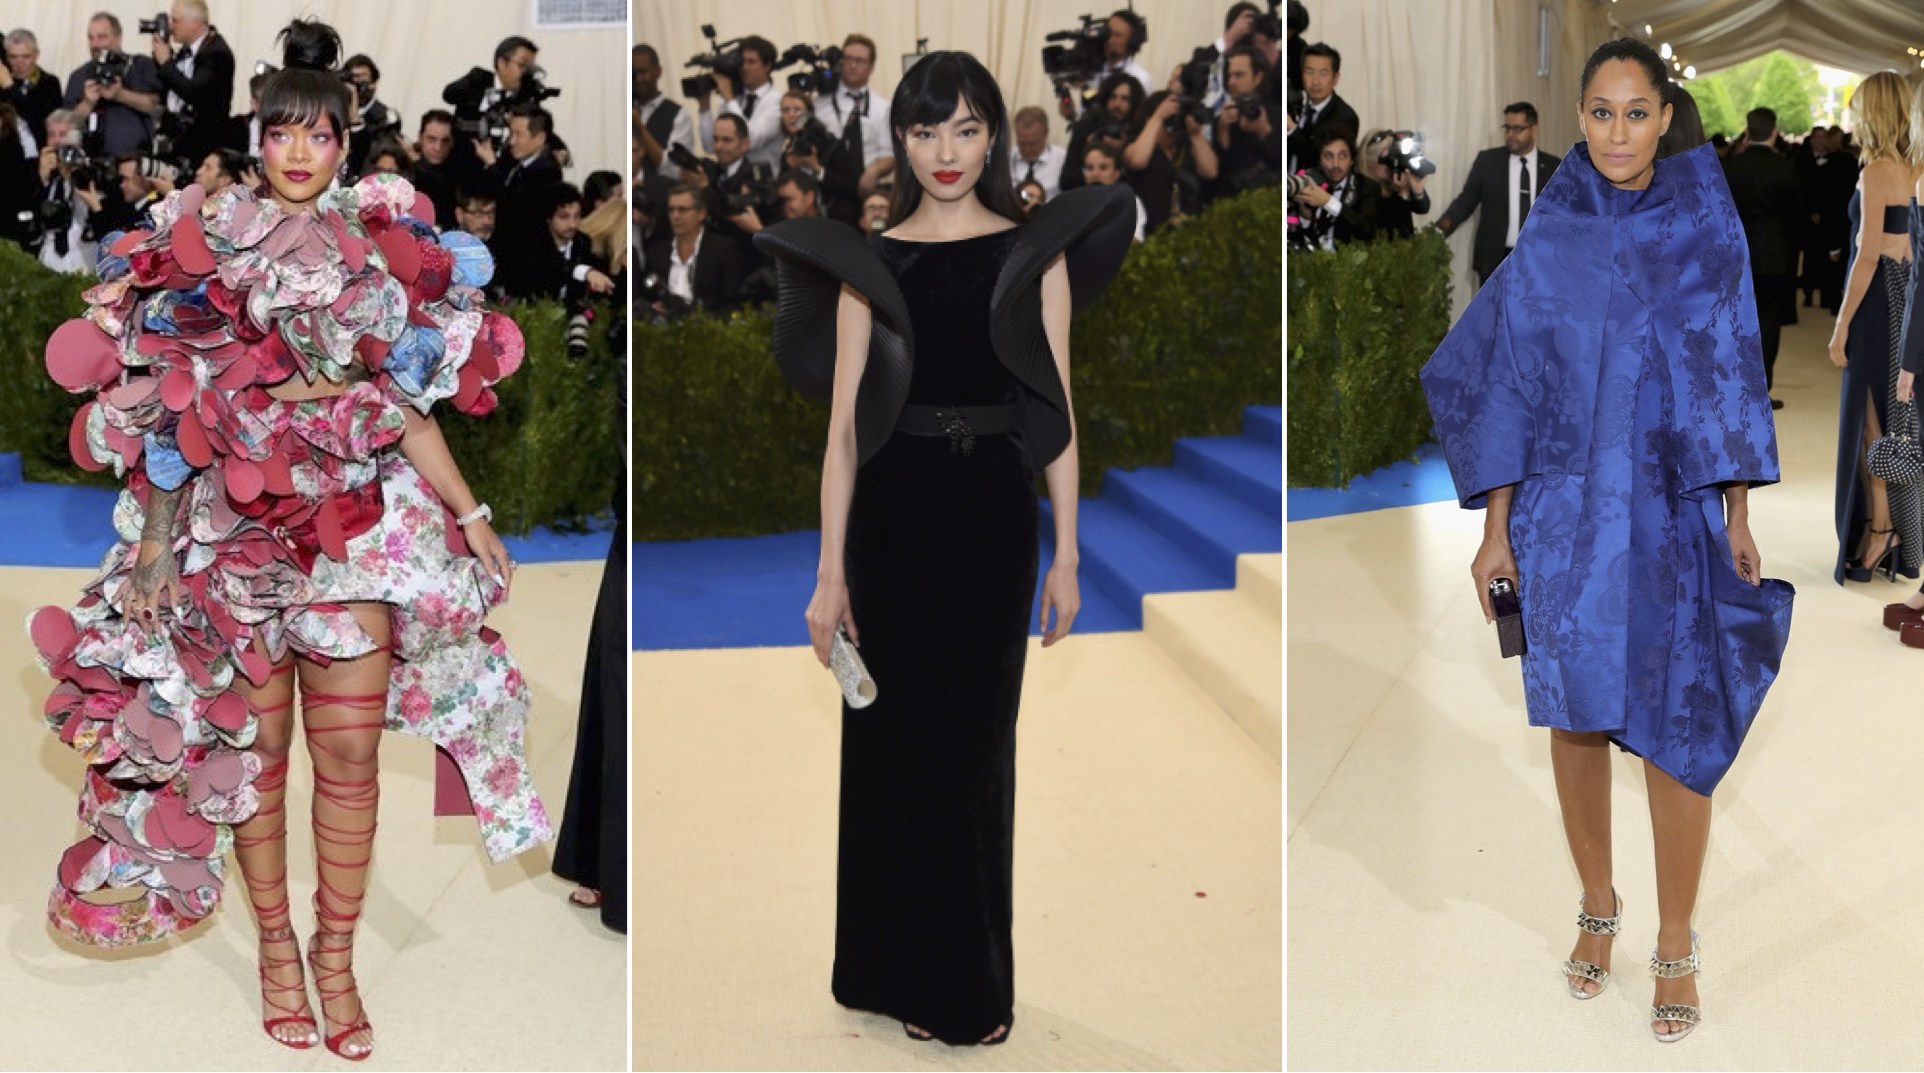 Met Gala 2017: Fashion Comes Out to Play | The Strategy